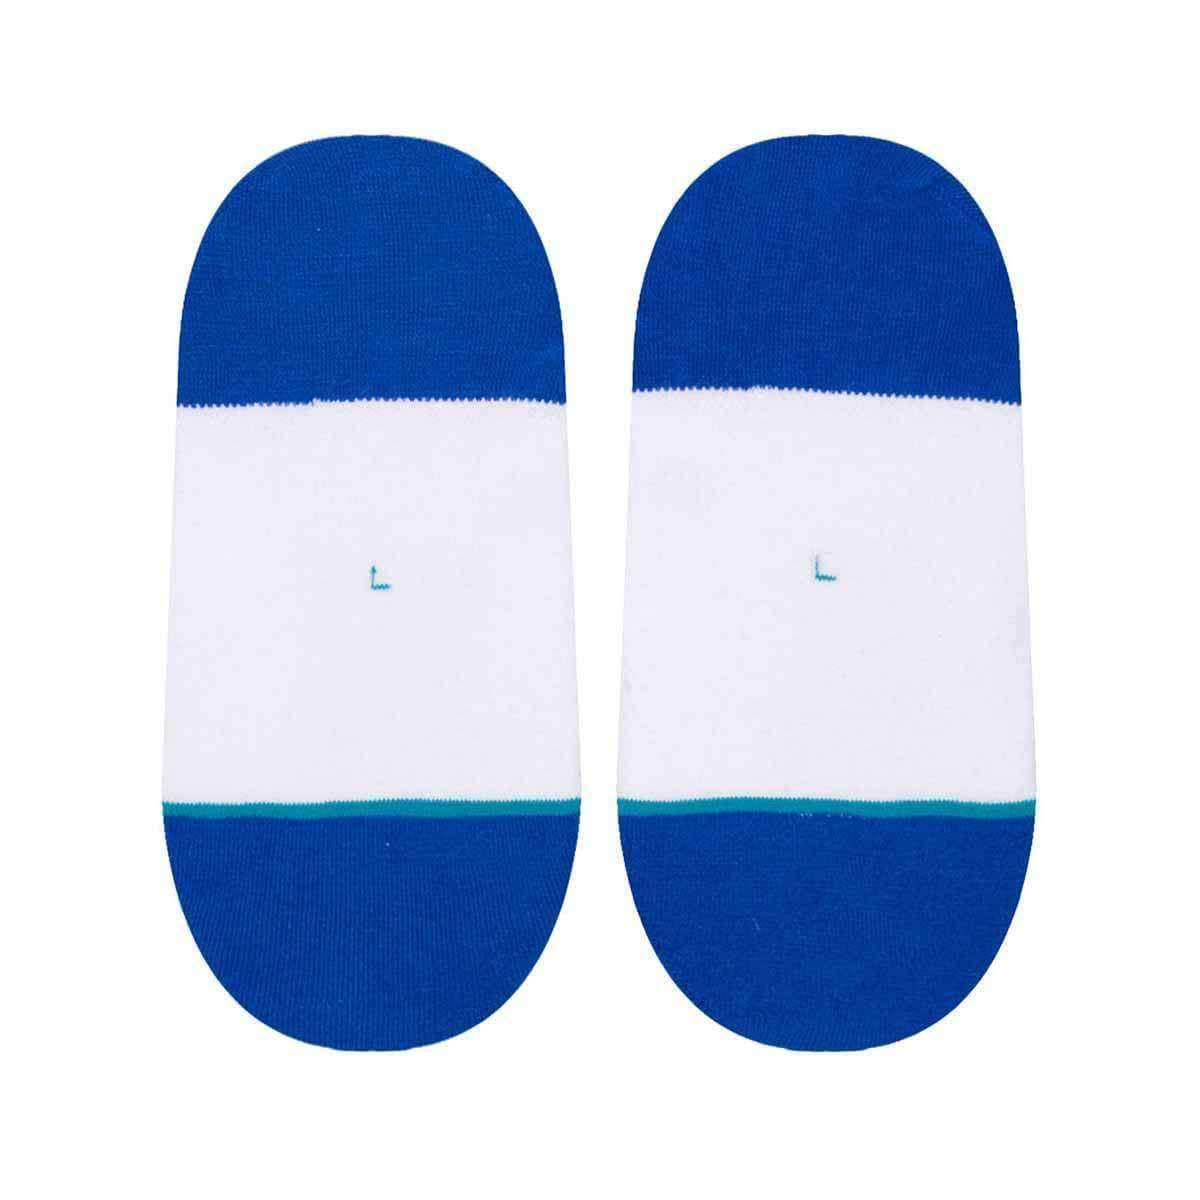 Stance NBA Arena Clipper Invisible Low Socks in White Mens Low/Ankle Socks by Stance